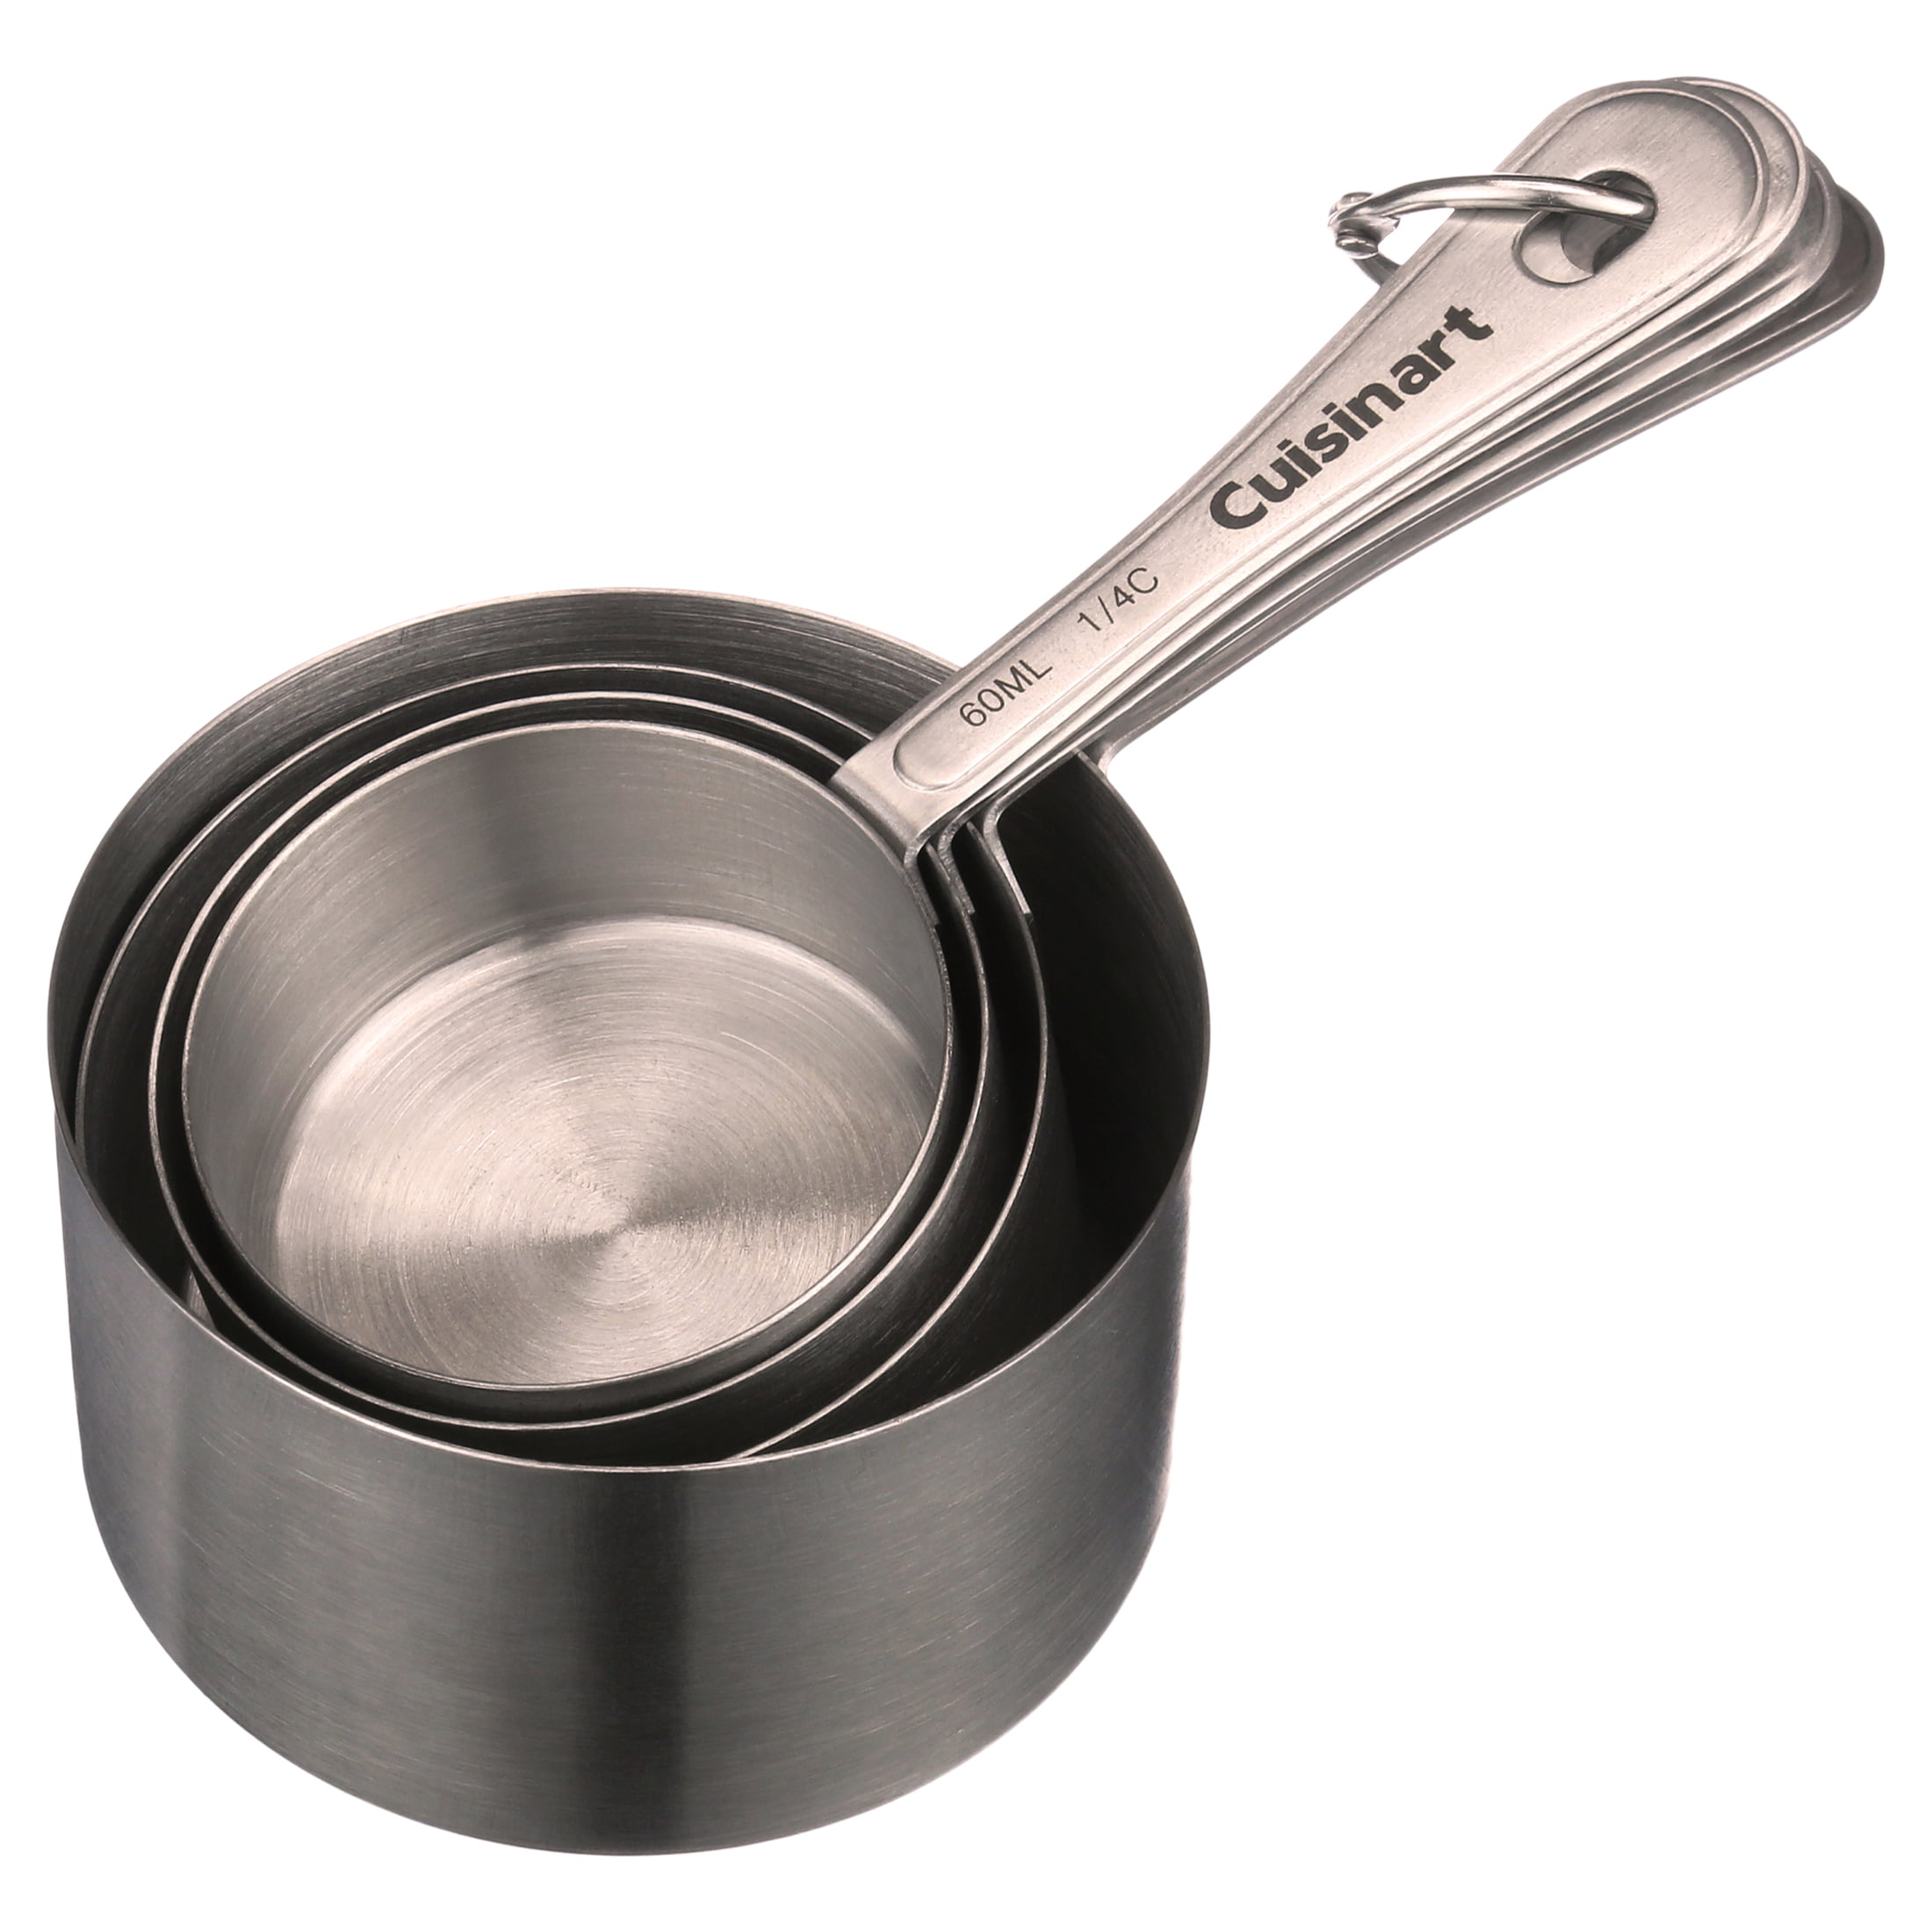 Cuisinart Non-Handled Stainless Steel Measuring Cups